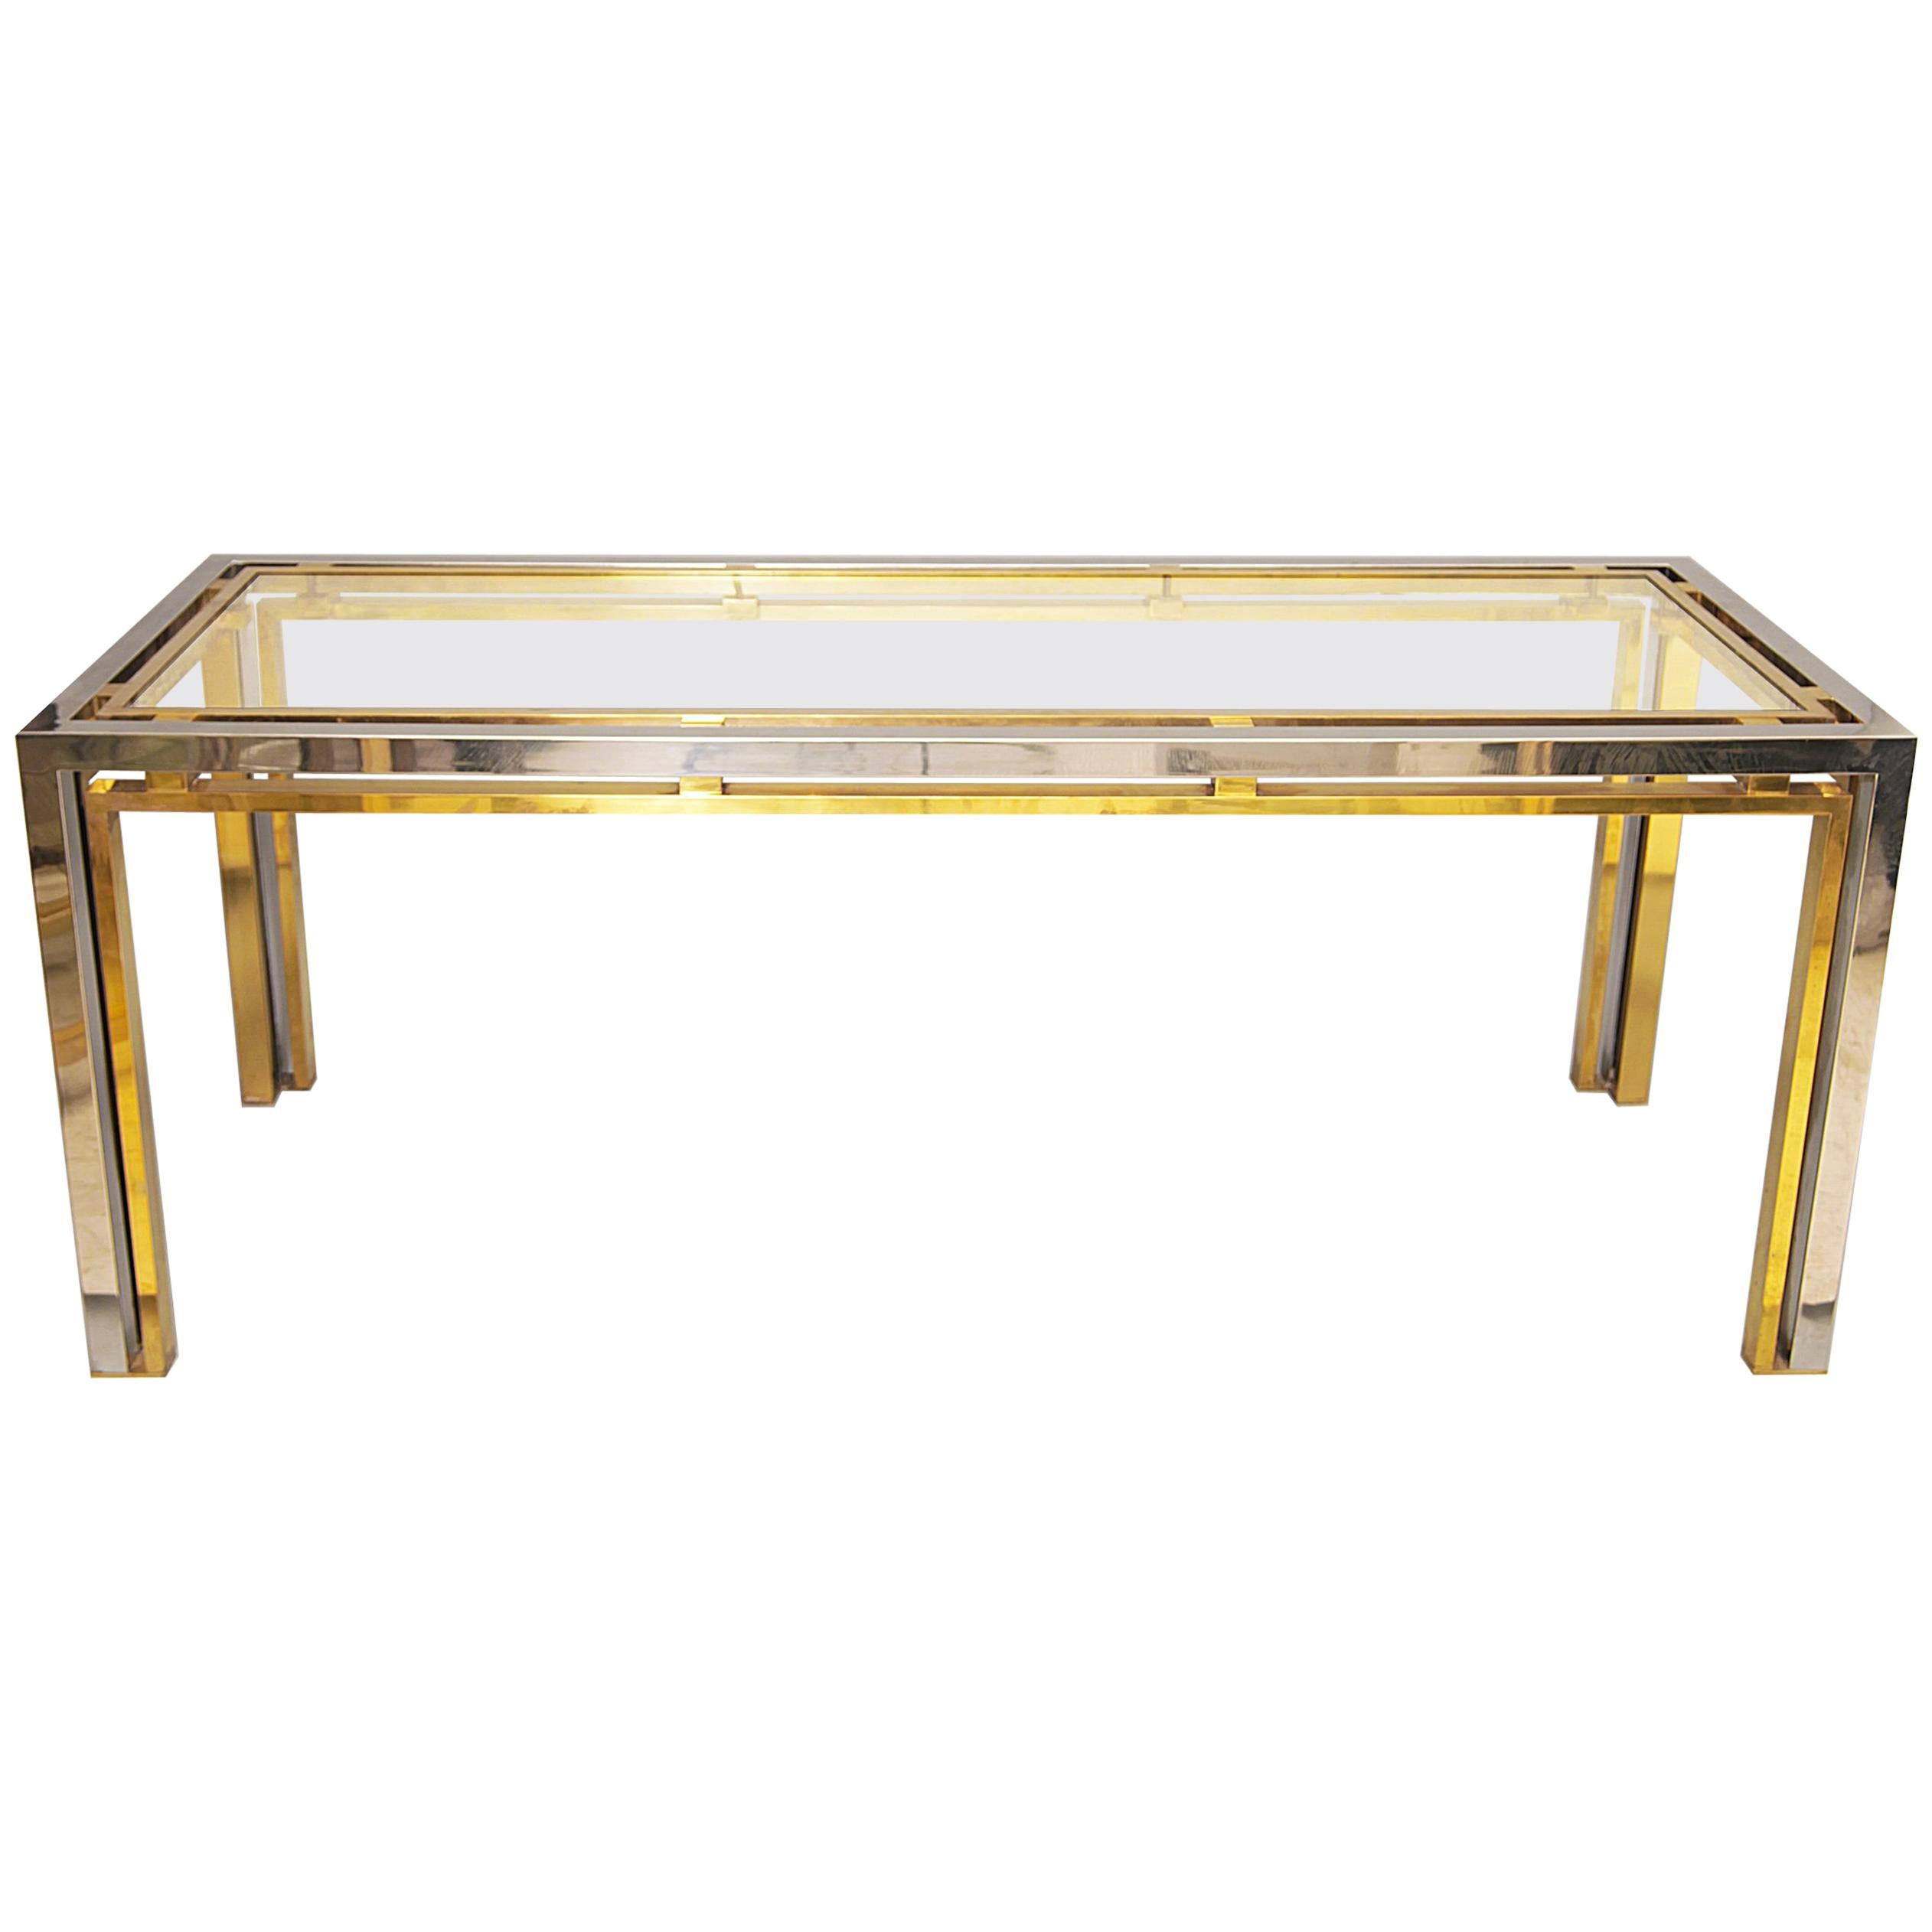 Romeo Rega Chrome and Brass with Glass Console Table, Desk or Sofa Table, 1970s im Angebot